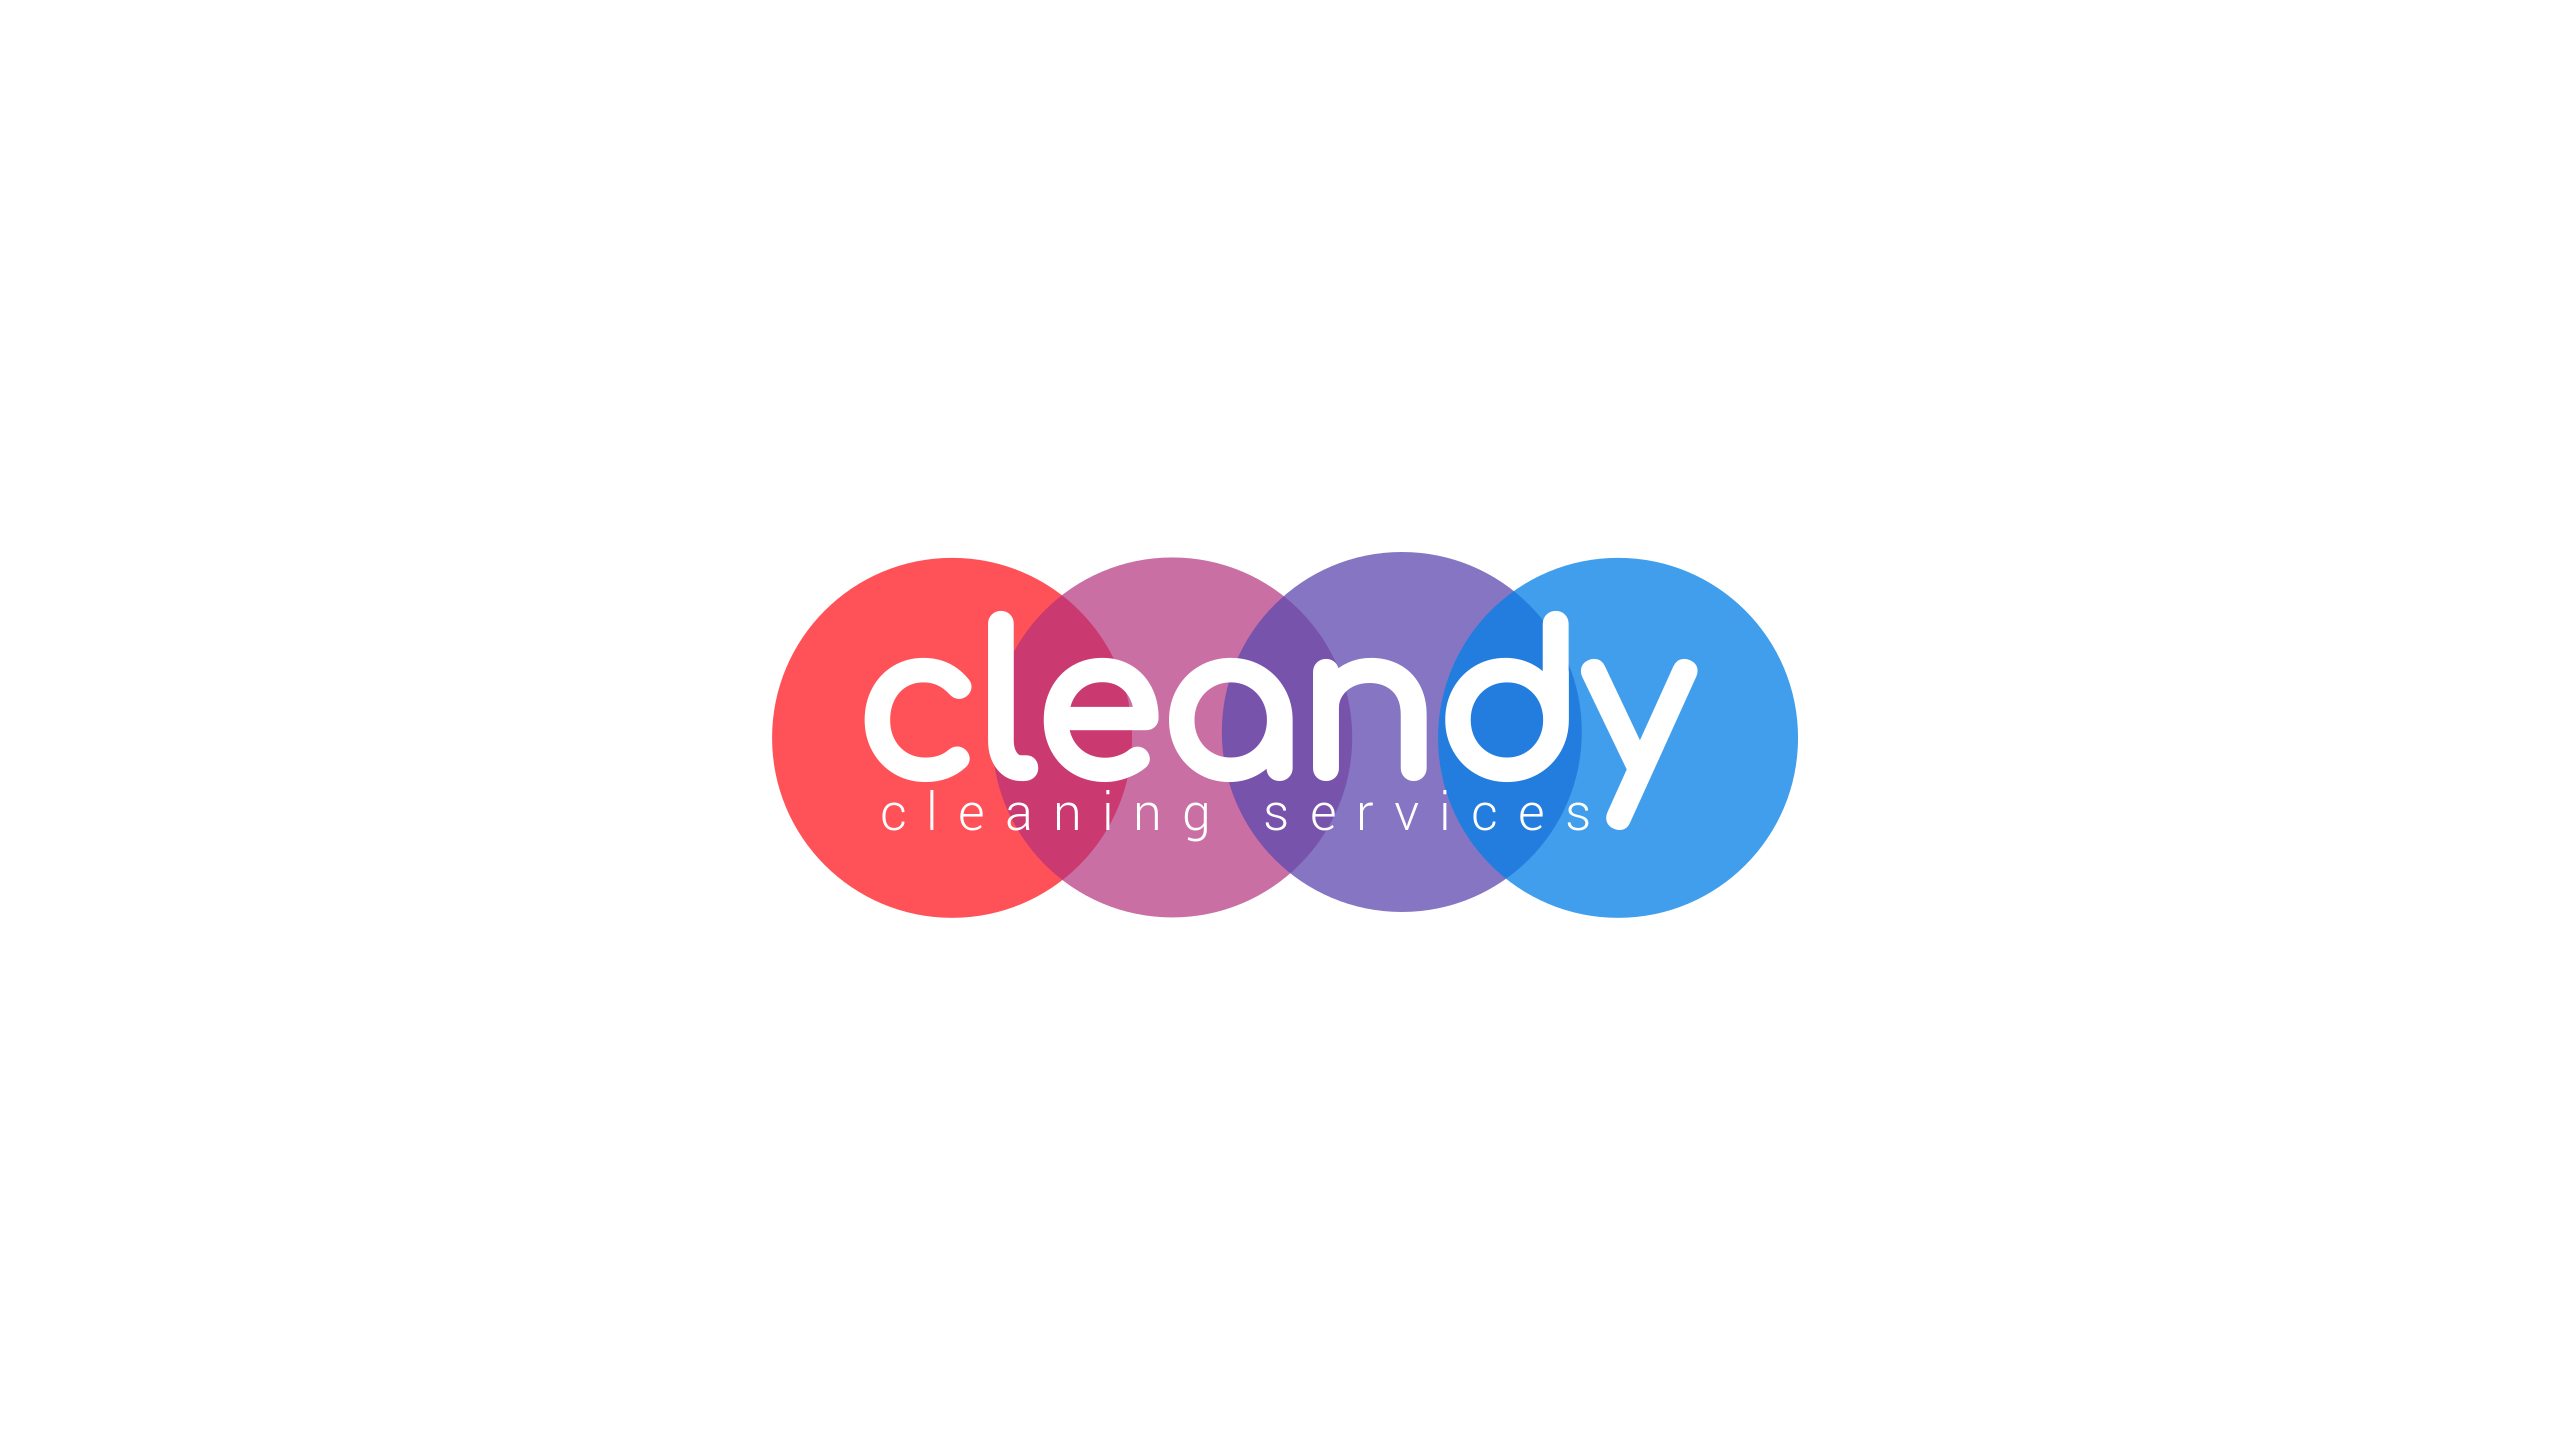 Cleandy Services